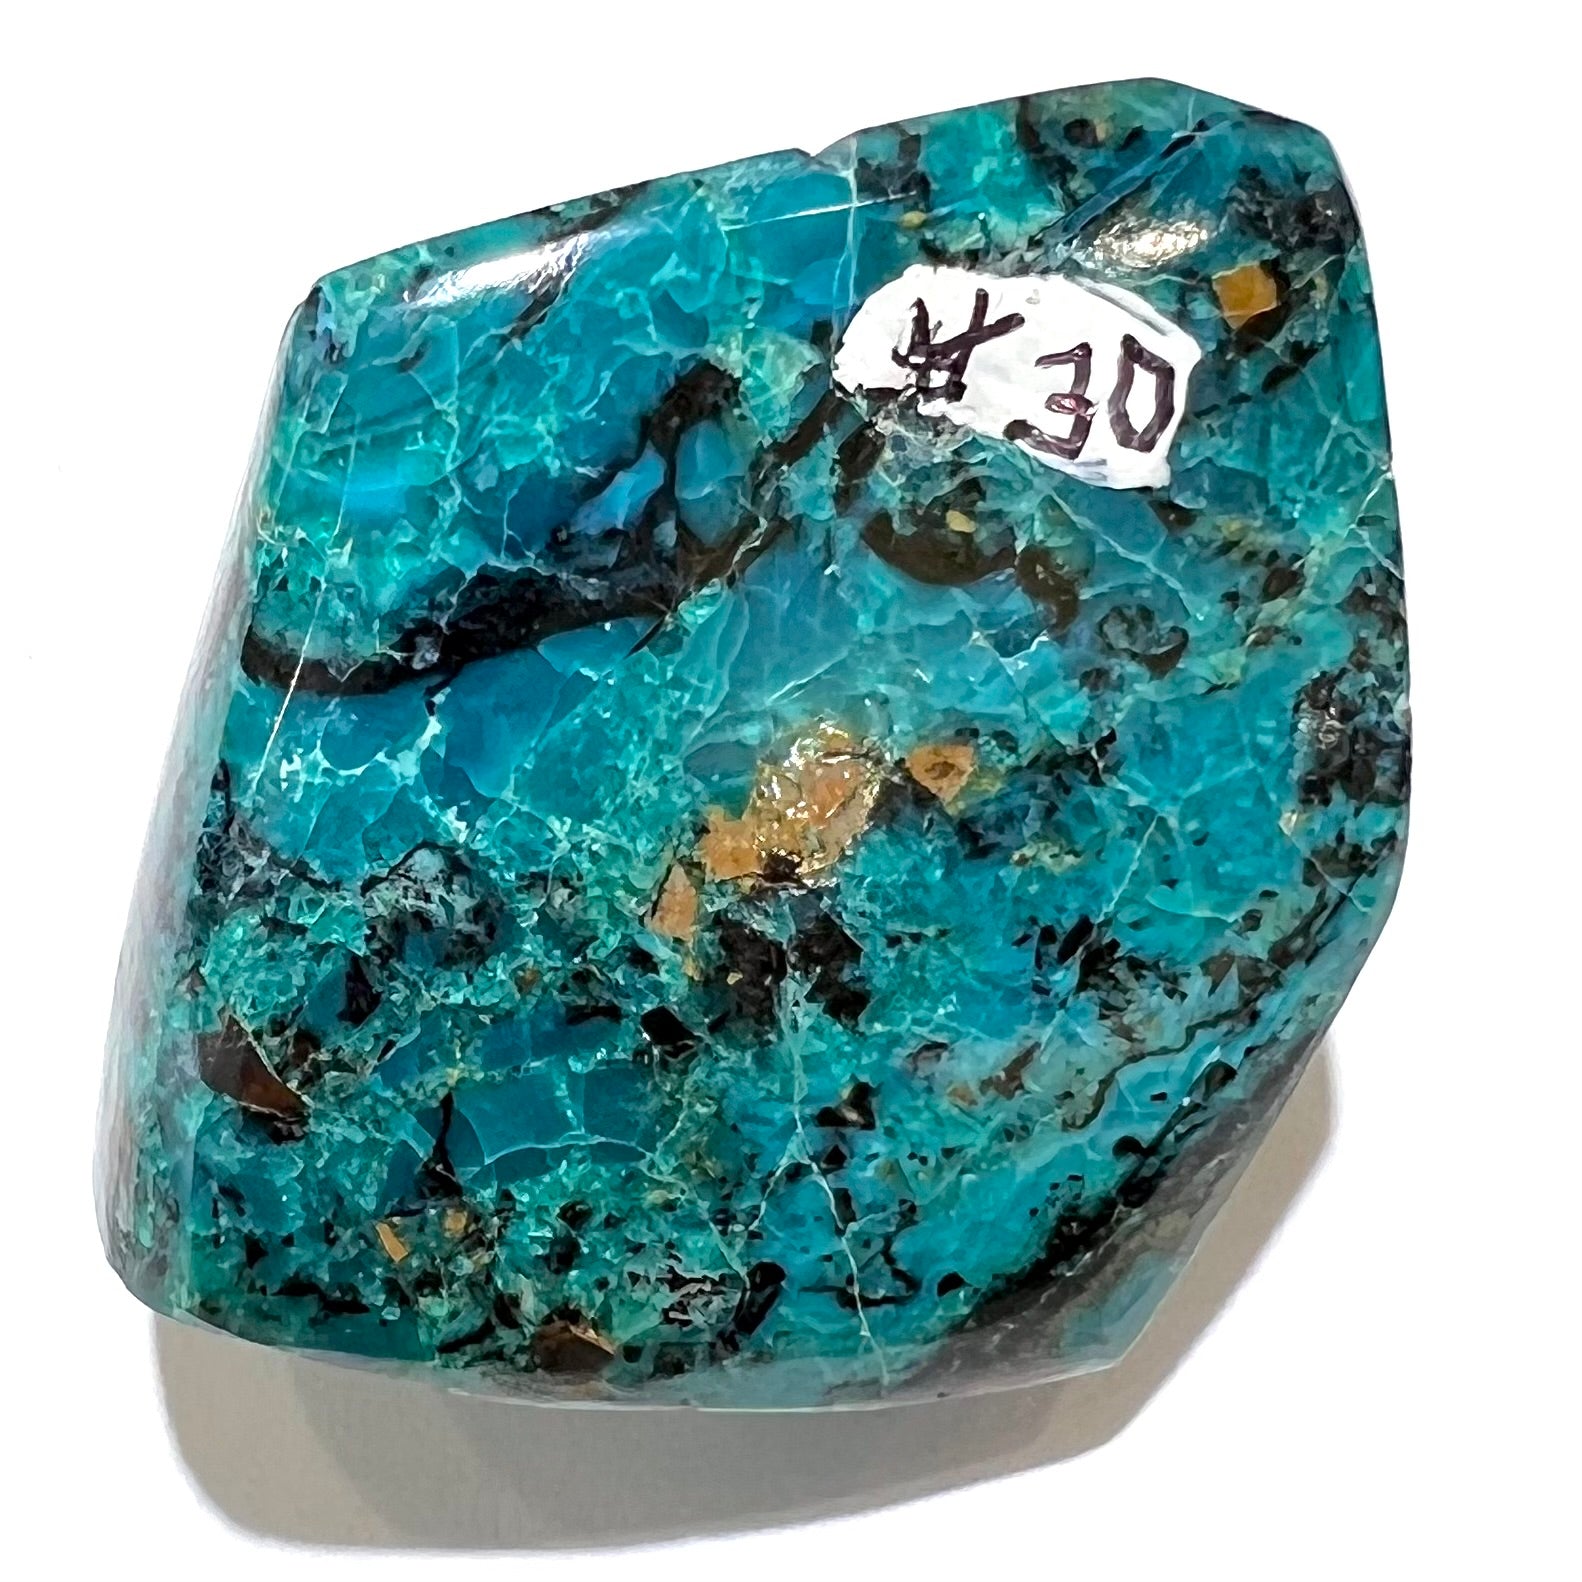 A loose polished chrysocolla specimen that has a crackled effect.